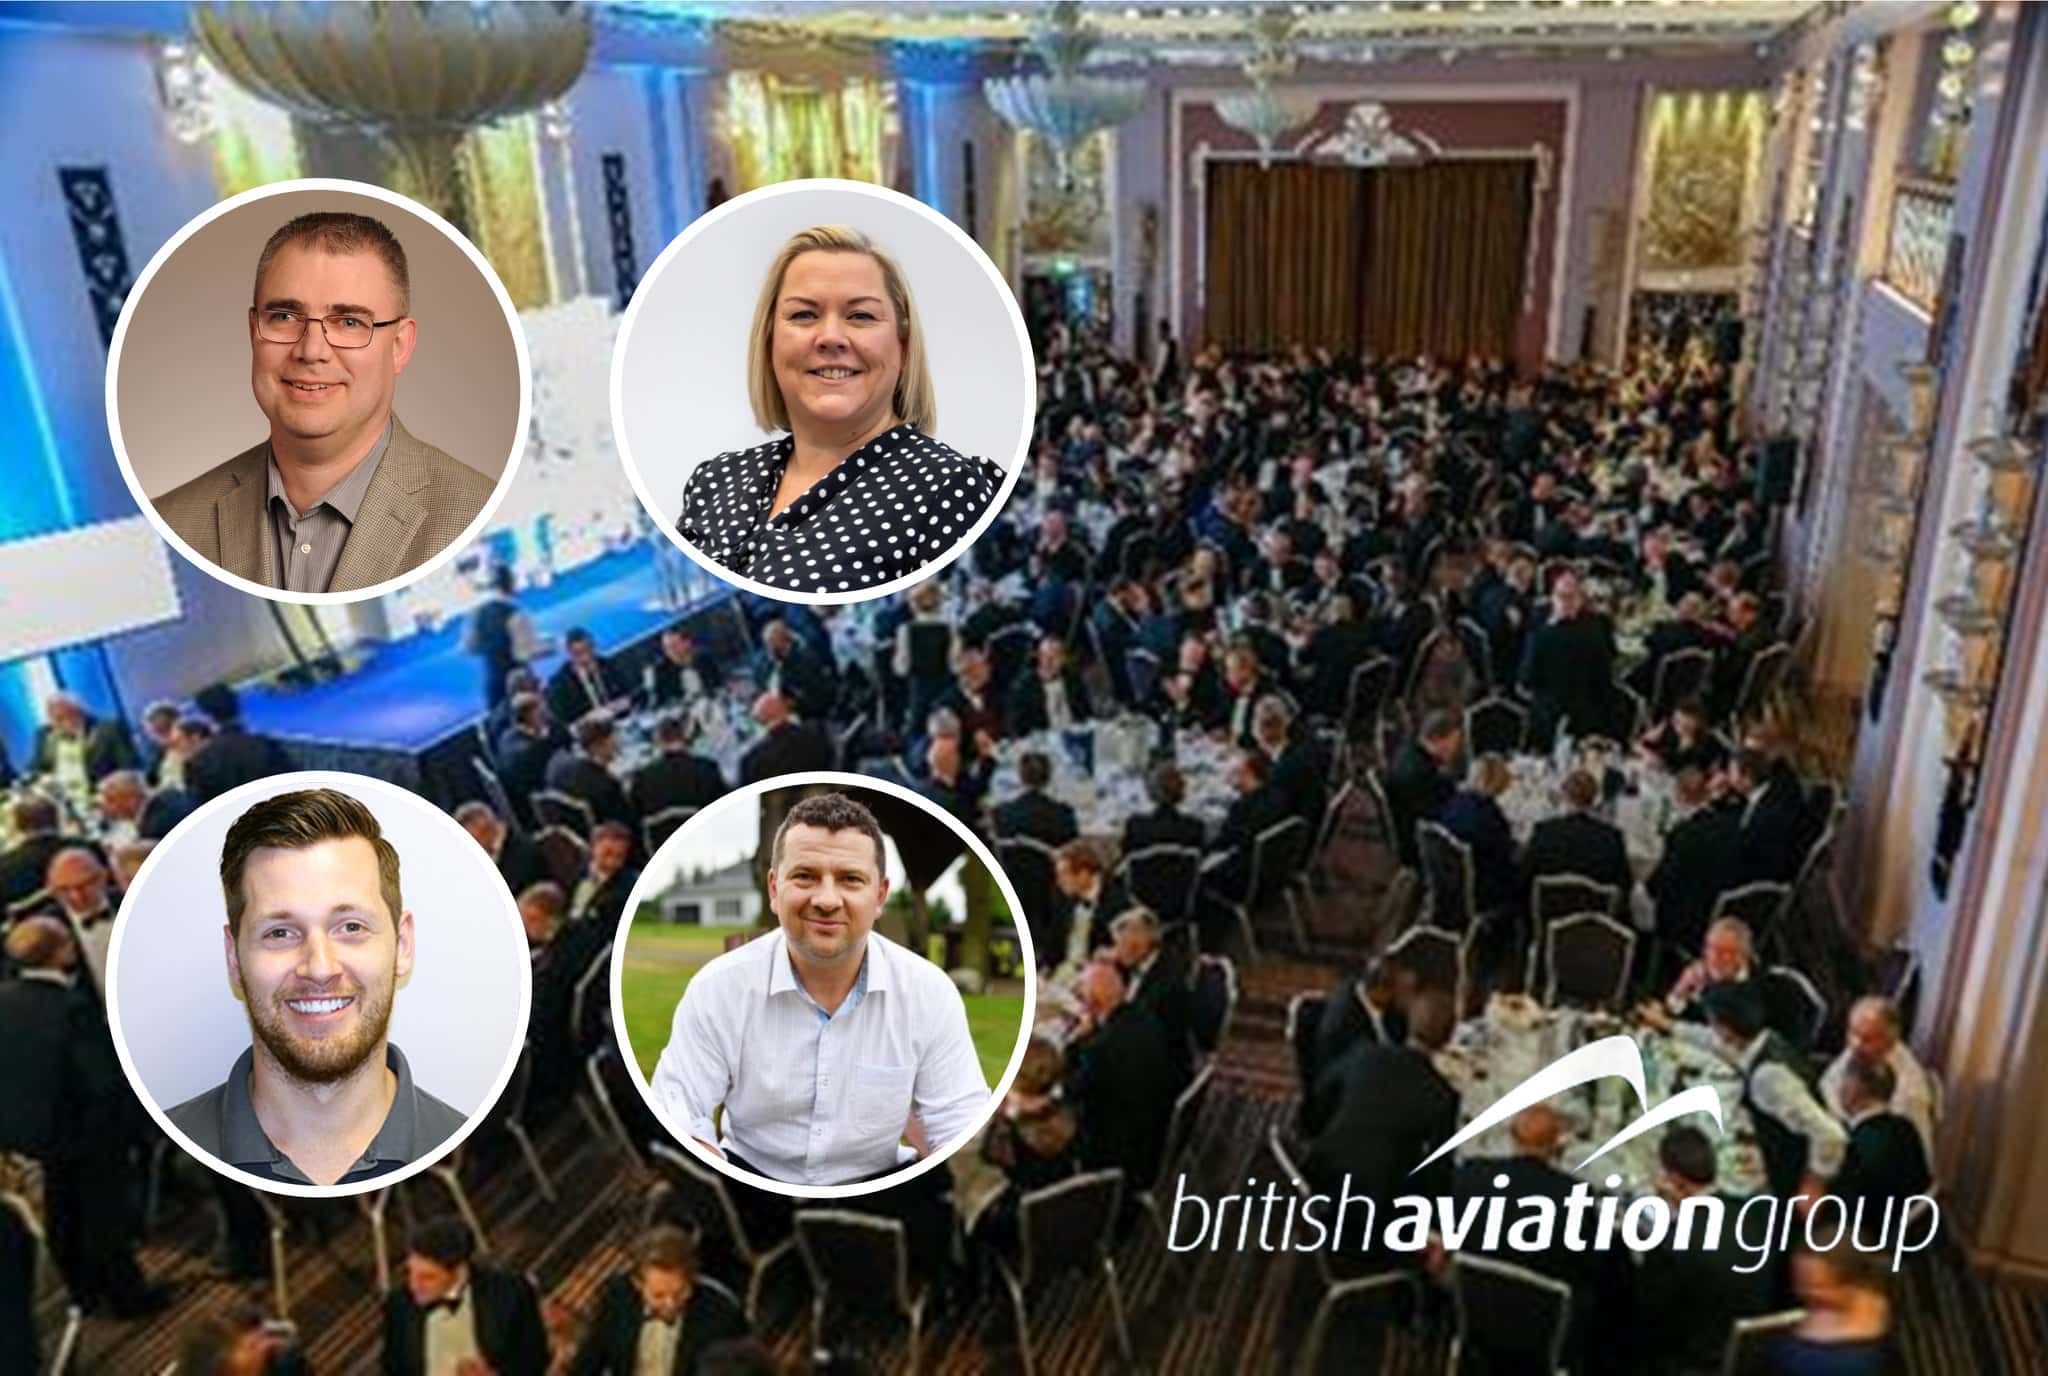 Brock Solutions will be attending the British Aviation Group New Year Dinner on January 18th! Come say hi to Mark Stokes, Alex Bingeman, Mel Jordan, and Eric Bird if you are attending. We look forward to a wonderful evening connecting with colleagues in the aviation industry!